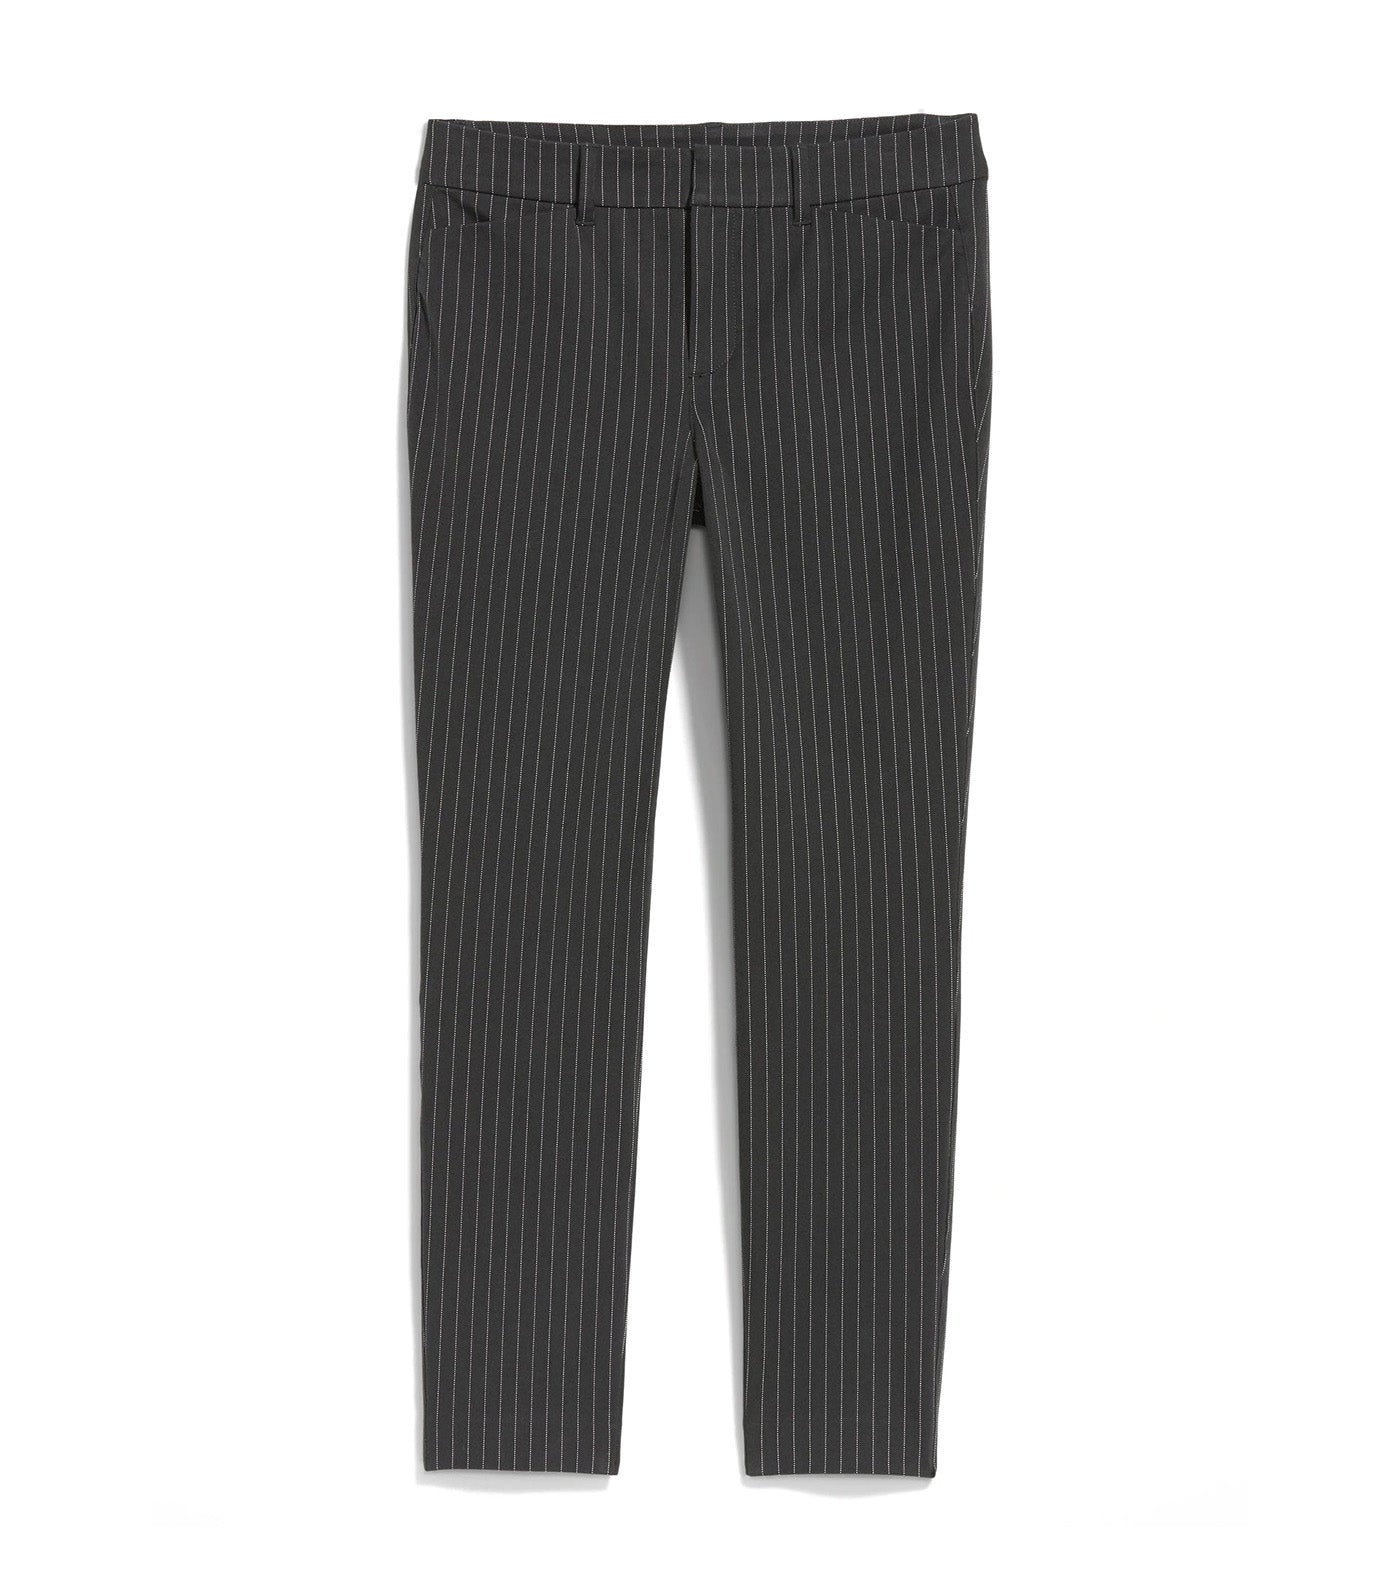 High-Waisted Pixie Skinny Ankle Pants for Women Gray Pinstripe